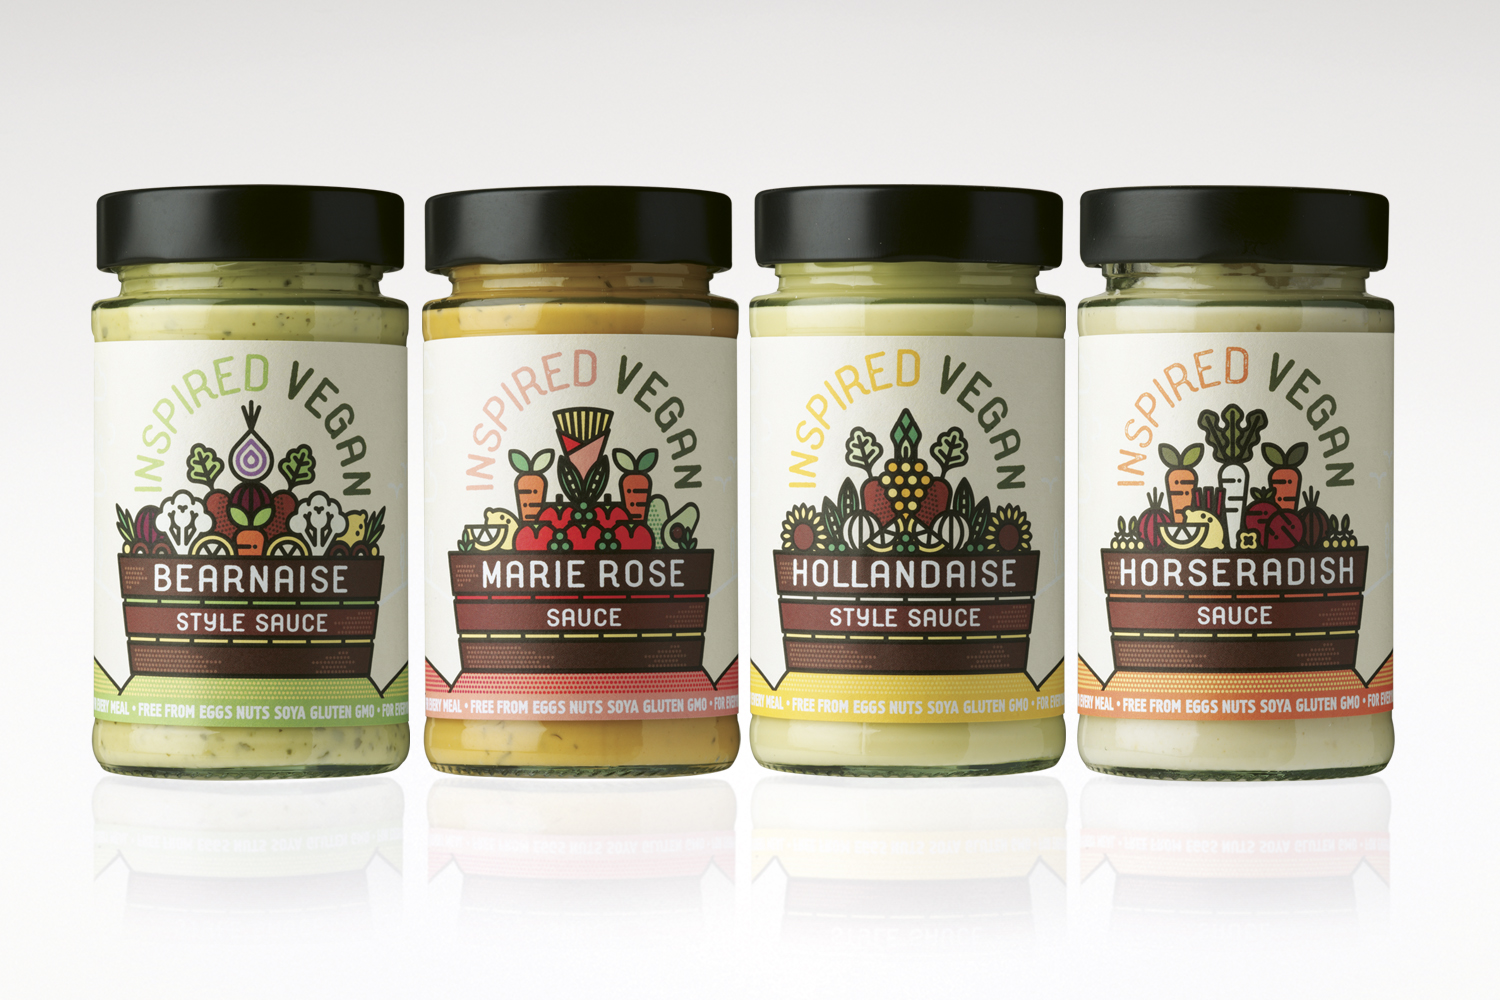 Mayday designs new sauce range for Inspired Dining